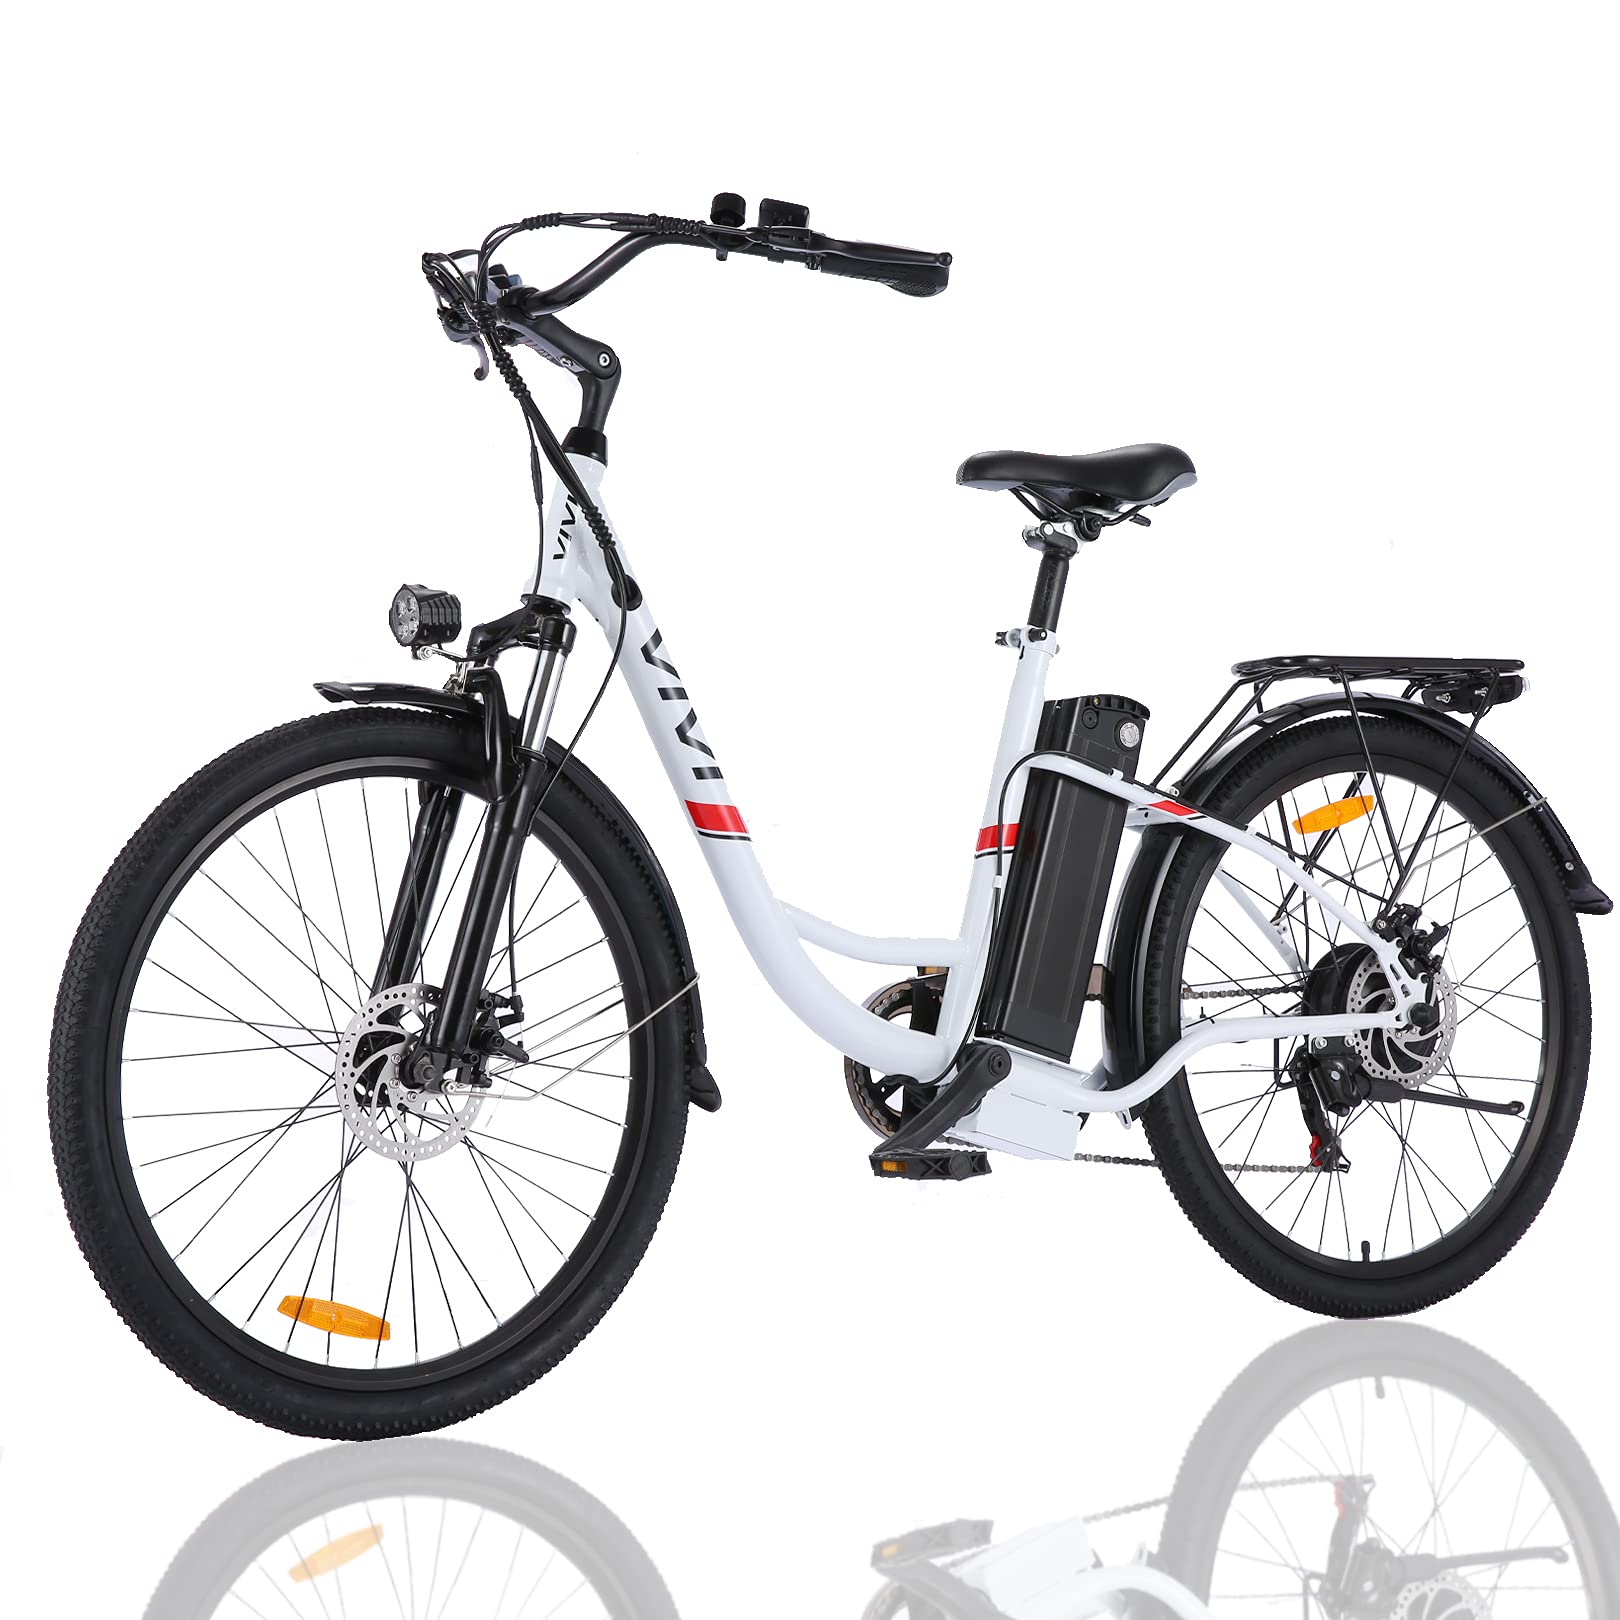 VIVI 26" Electric Cruiser Bike,350W Electric Bike/City Ebike with Removable 36V 8Ah Lithium-ion Battery,Shimano 7 Speed Commuter Electric Bicycles,20MPH & 50 Mile Range Adult Electric Bikes | Decor Gifts and More